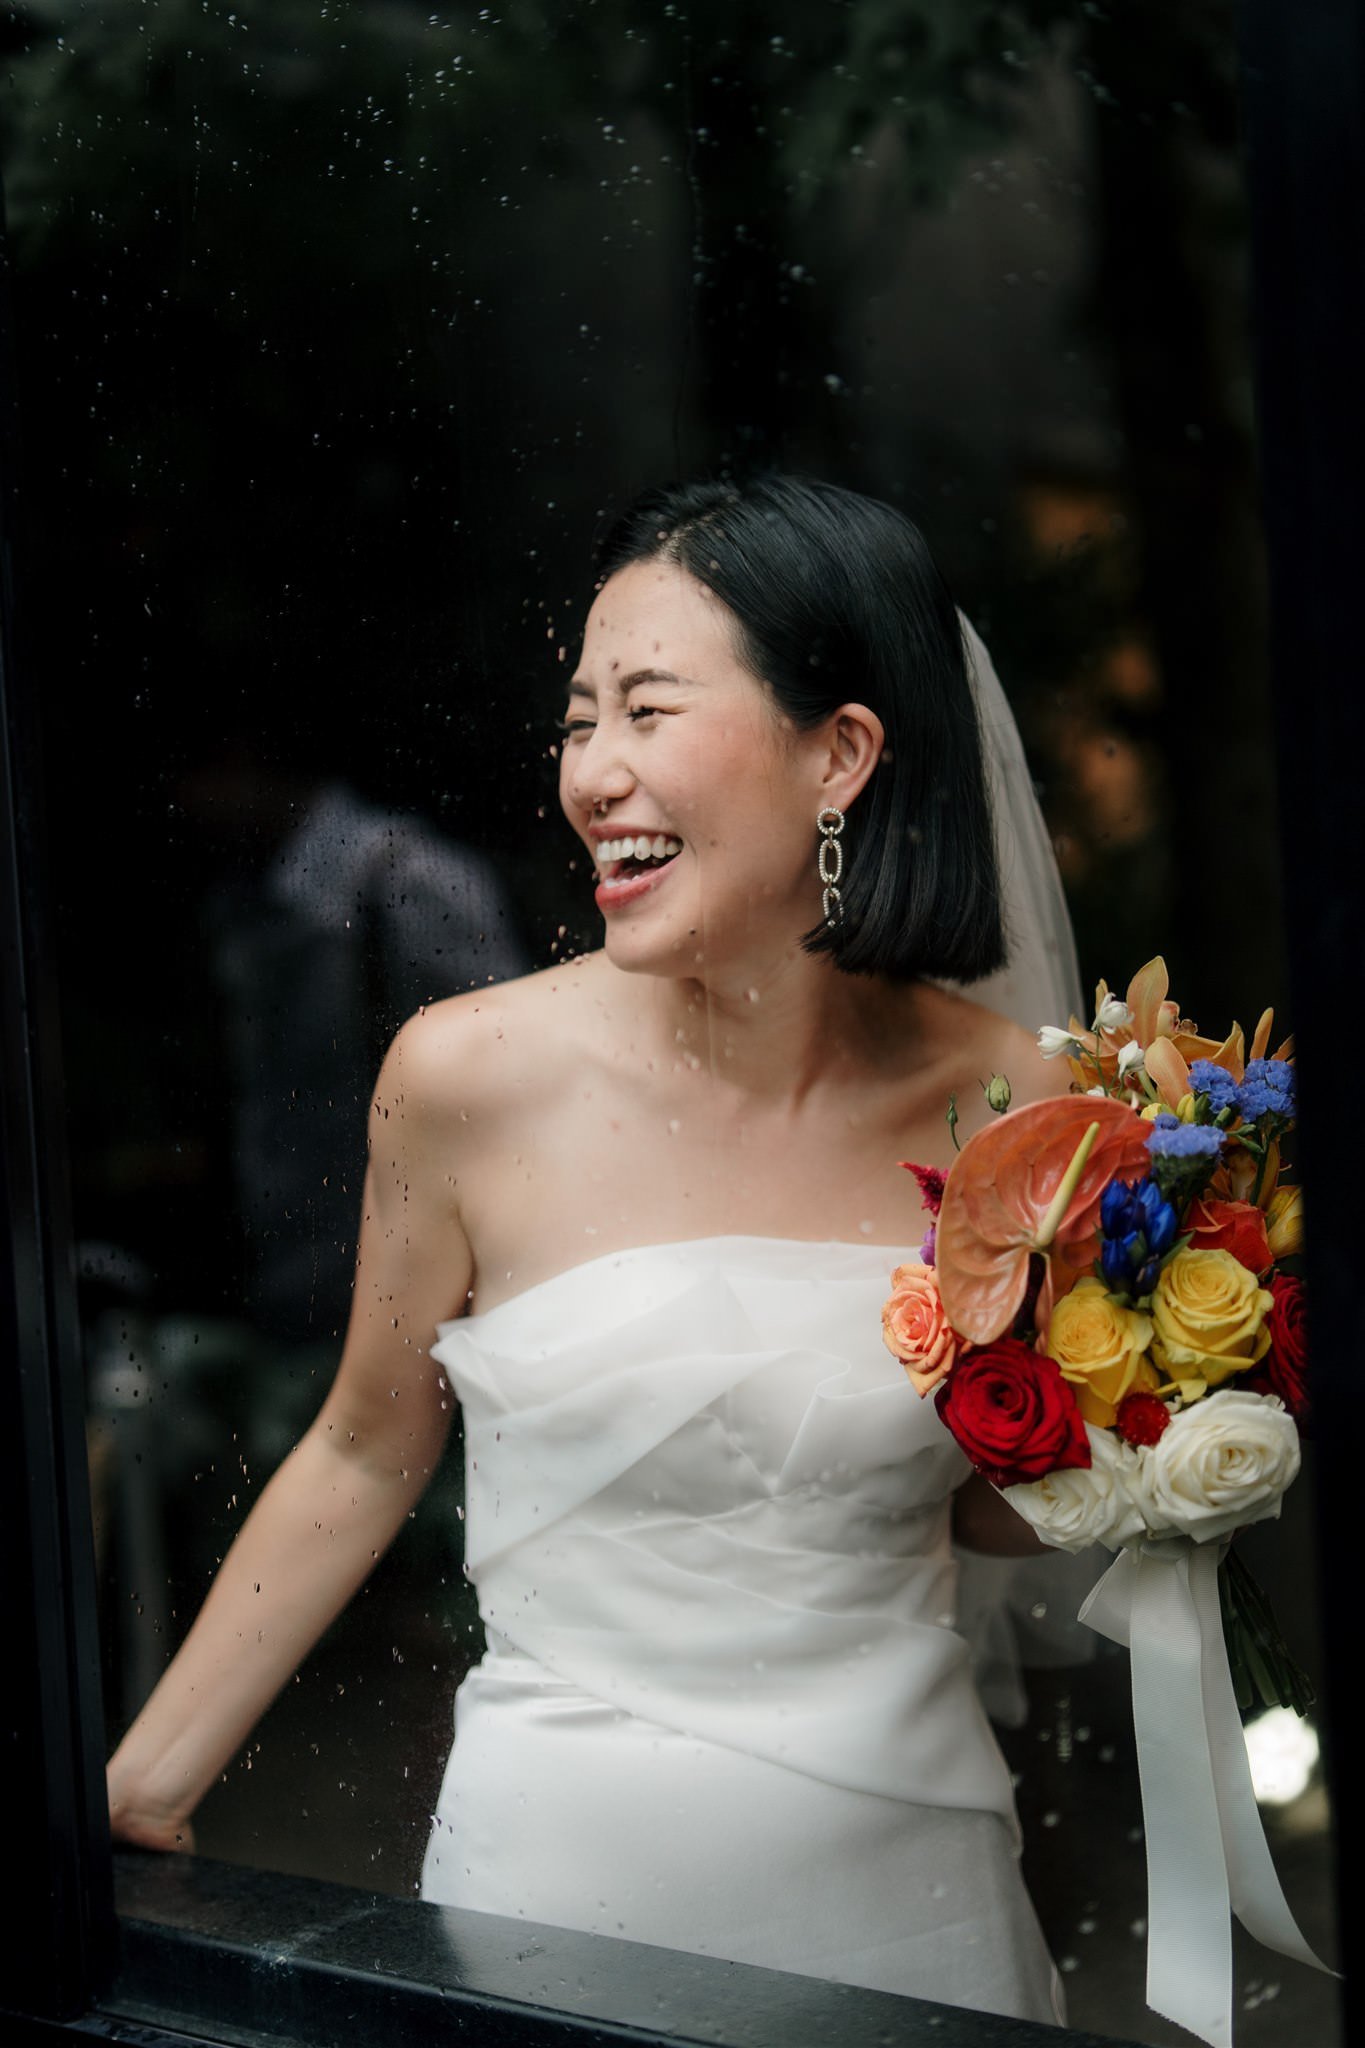 glasshouse-morningside-urban-best-auckland-wedding-venue-central-indoor-photographer-videographer-dear-white-productions-top-industrial-chinese-ceremony-tradition (117).jpg